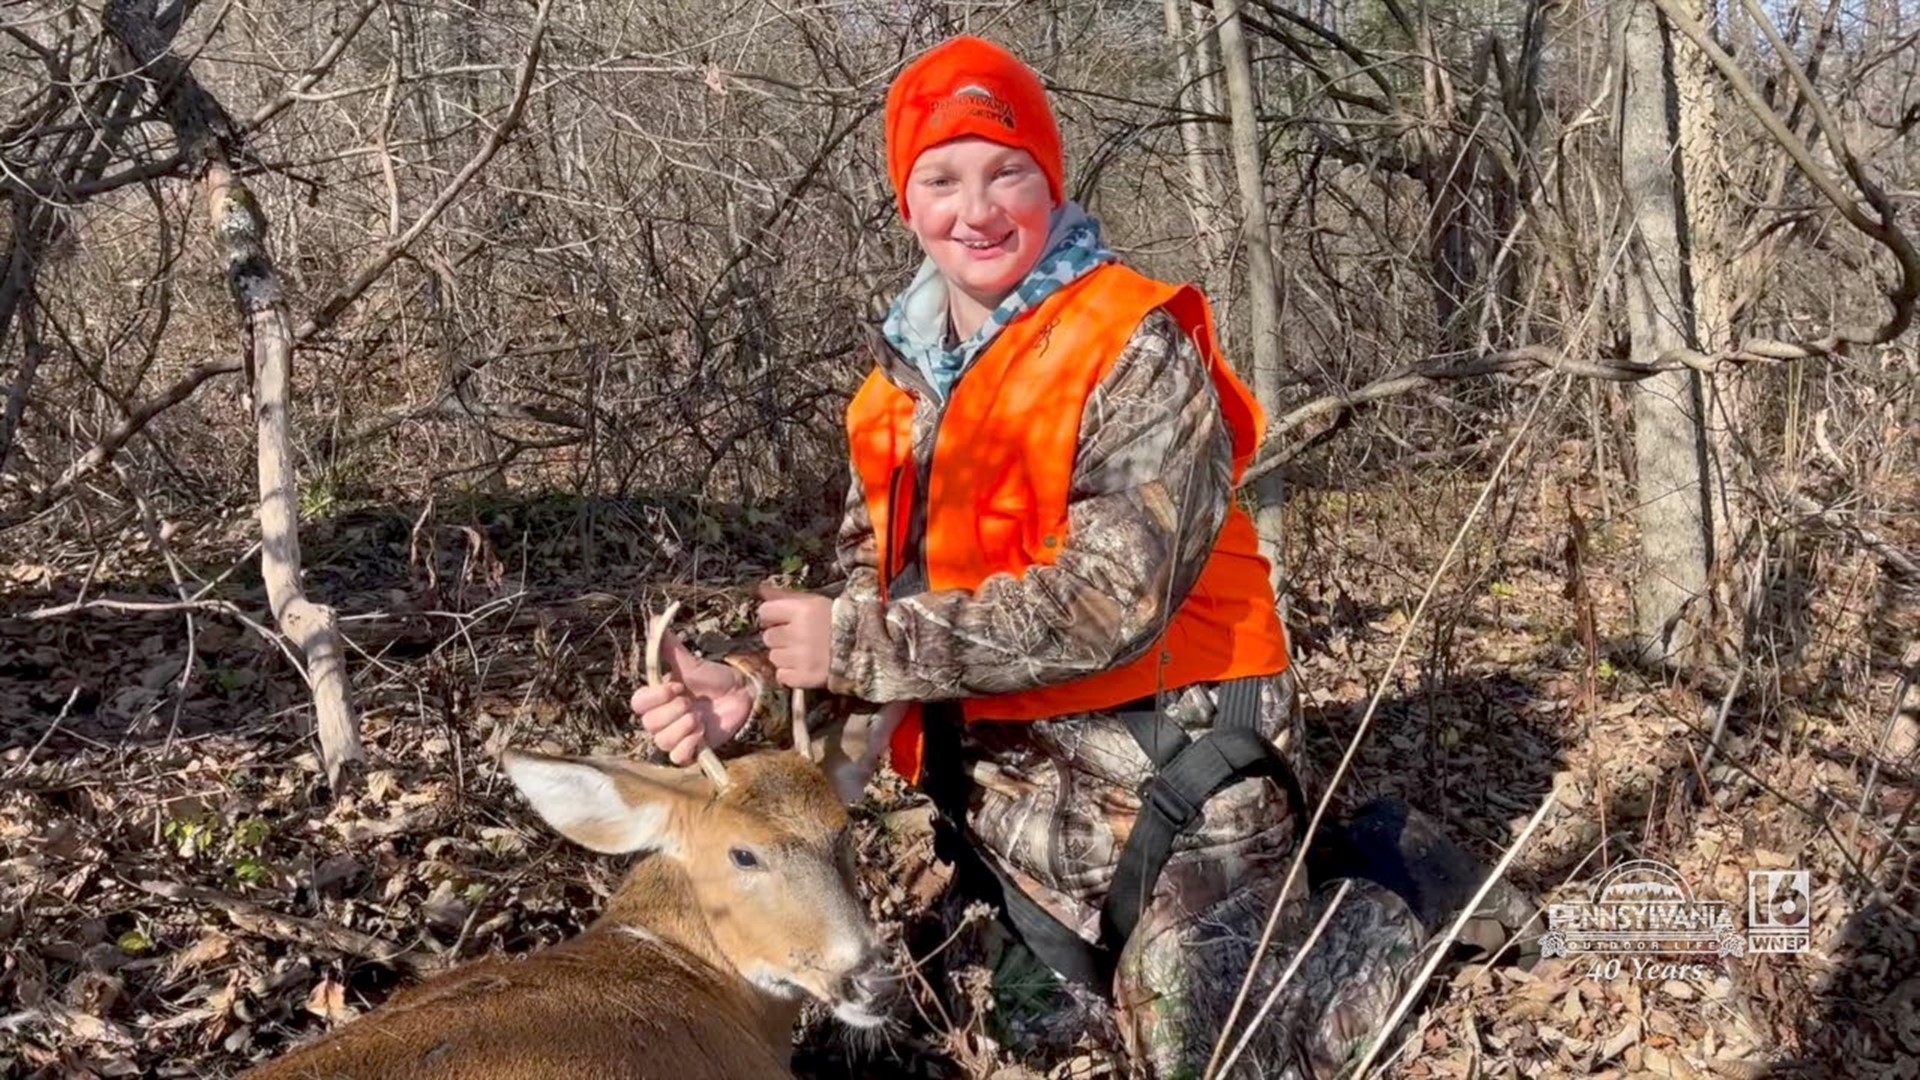 Many young hunters harvested their very first deer during the first week of the gun season.